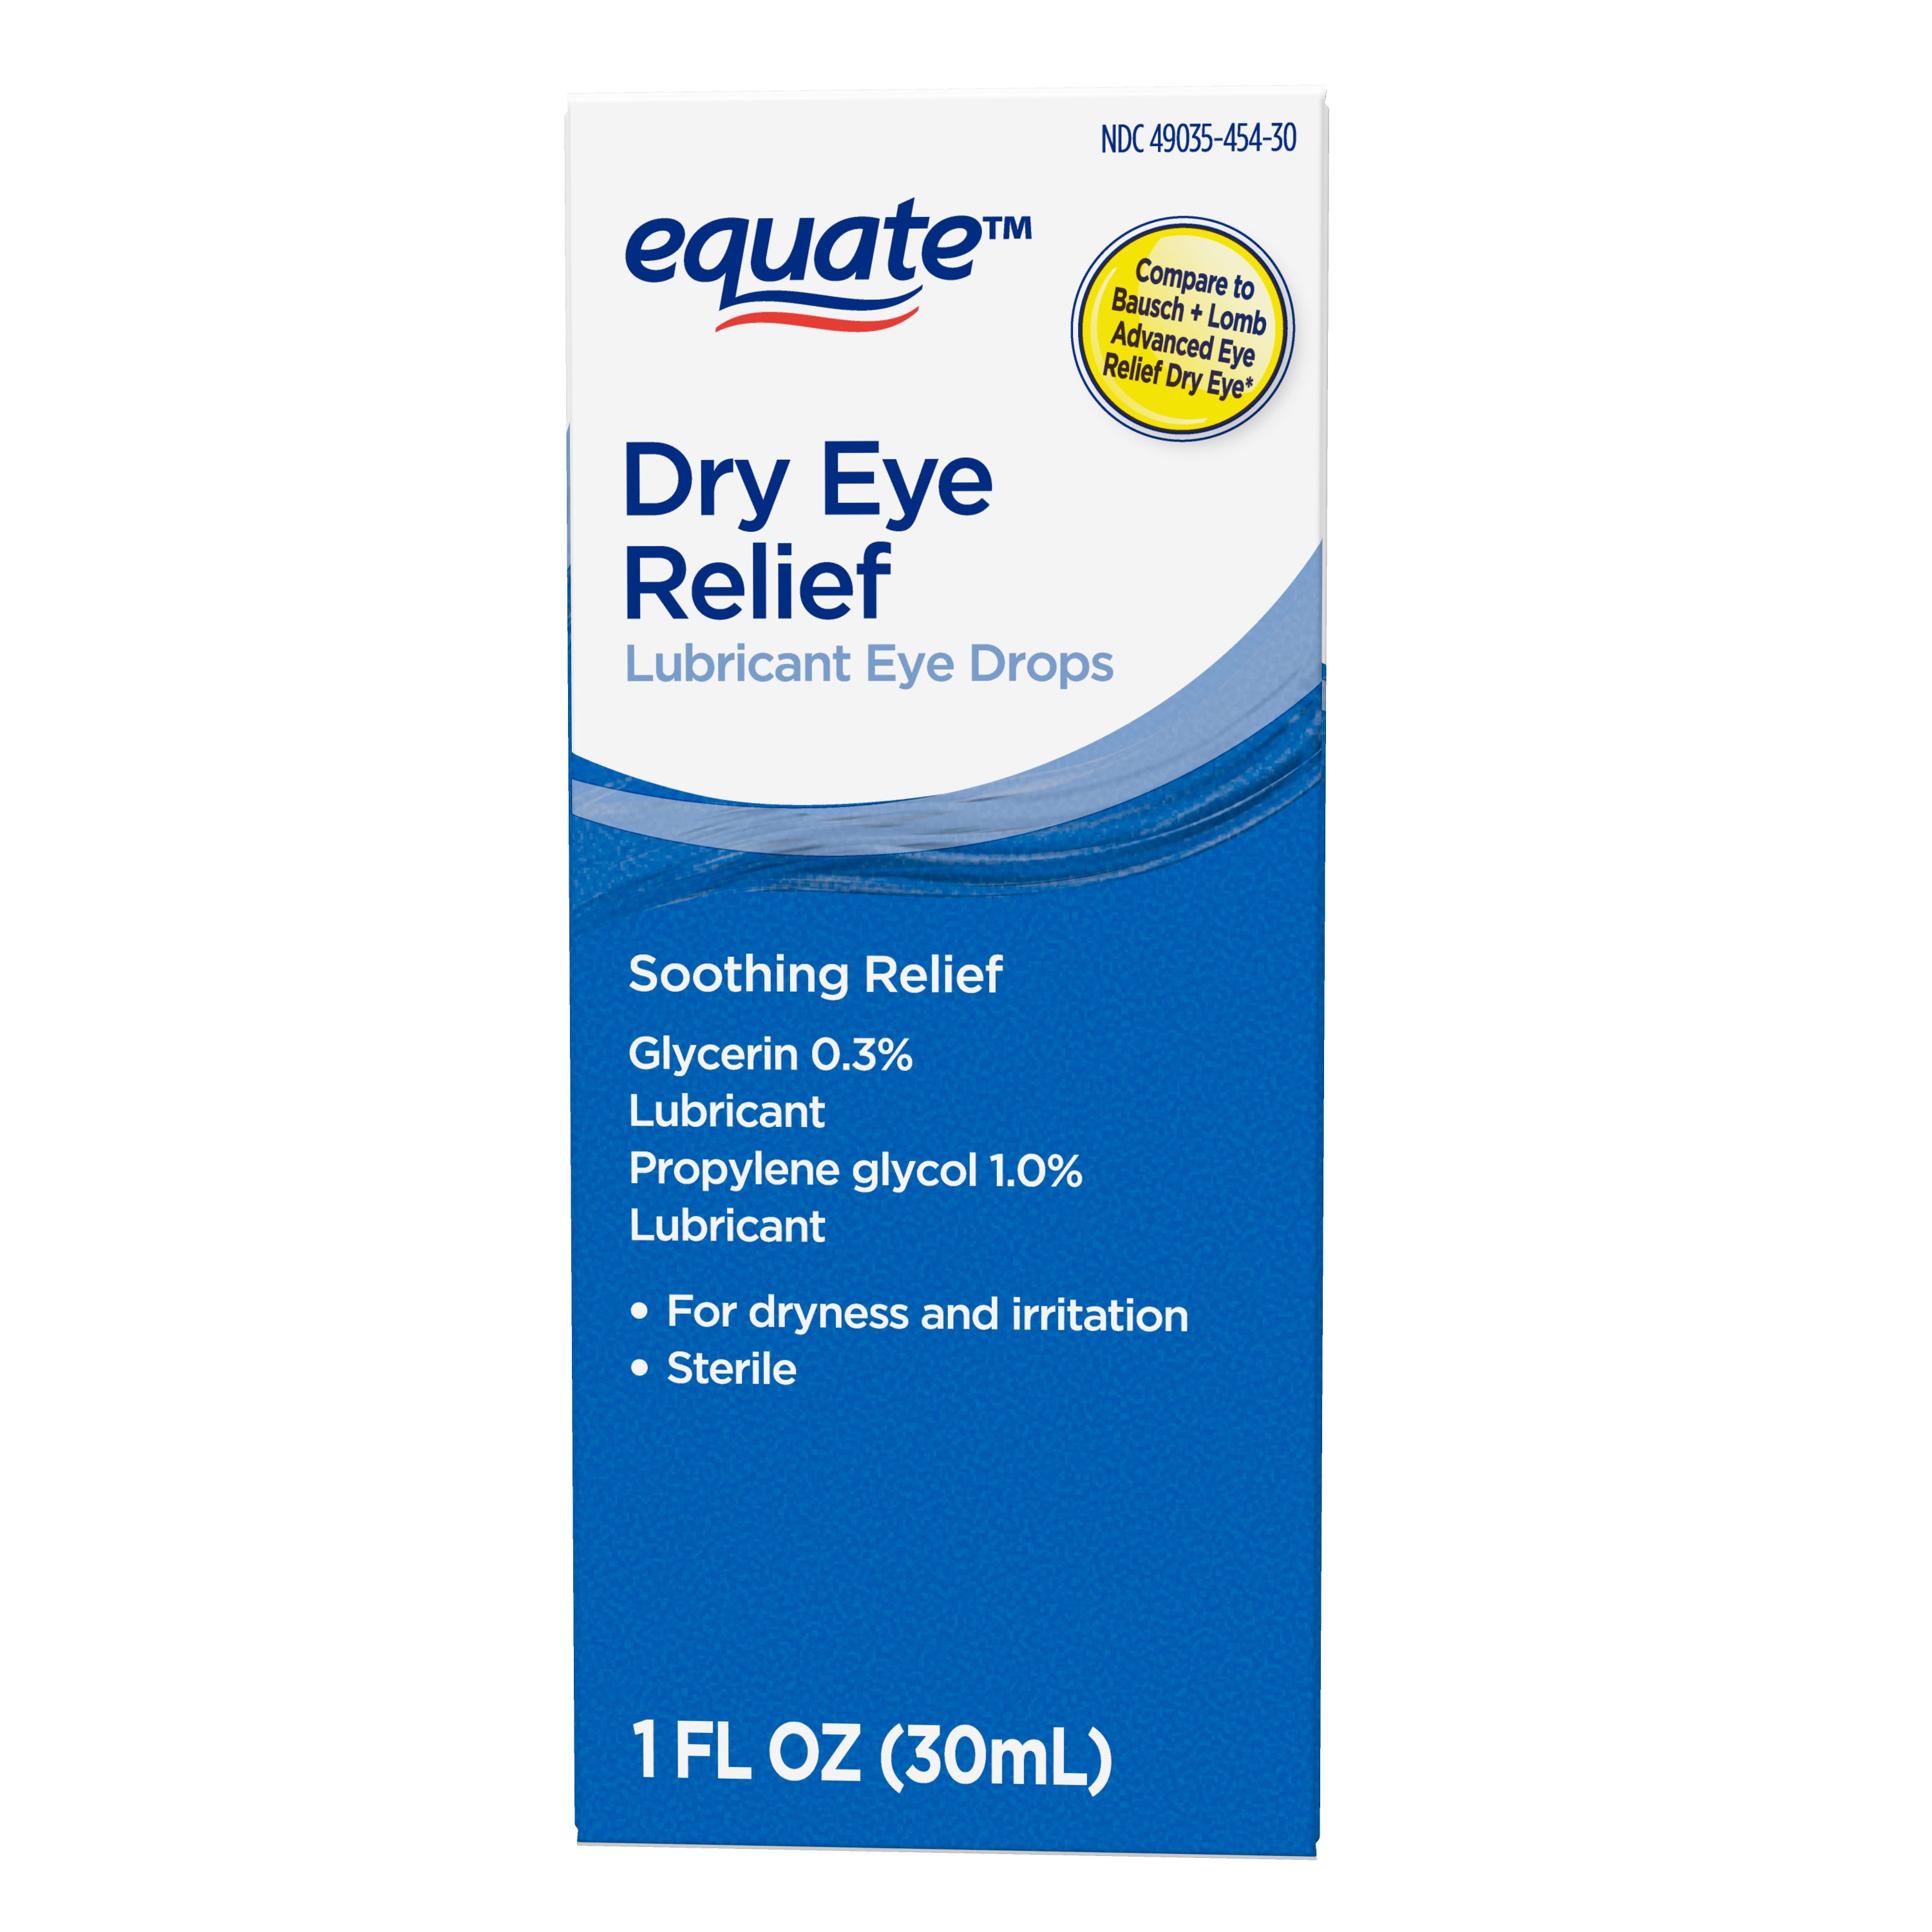 Equate Dry Eye Relief Lubricant Eye Drops, 1 fl oz - image 1 of 9